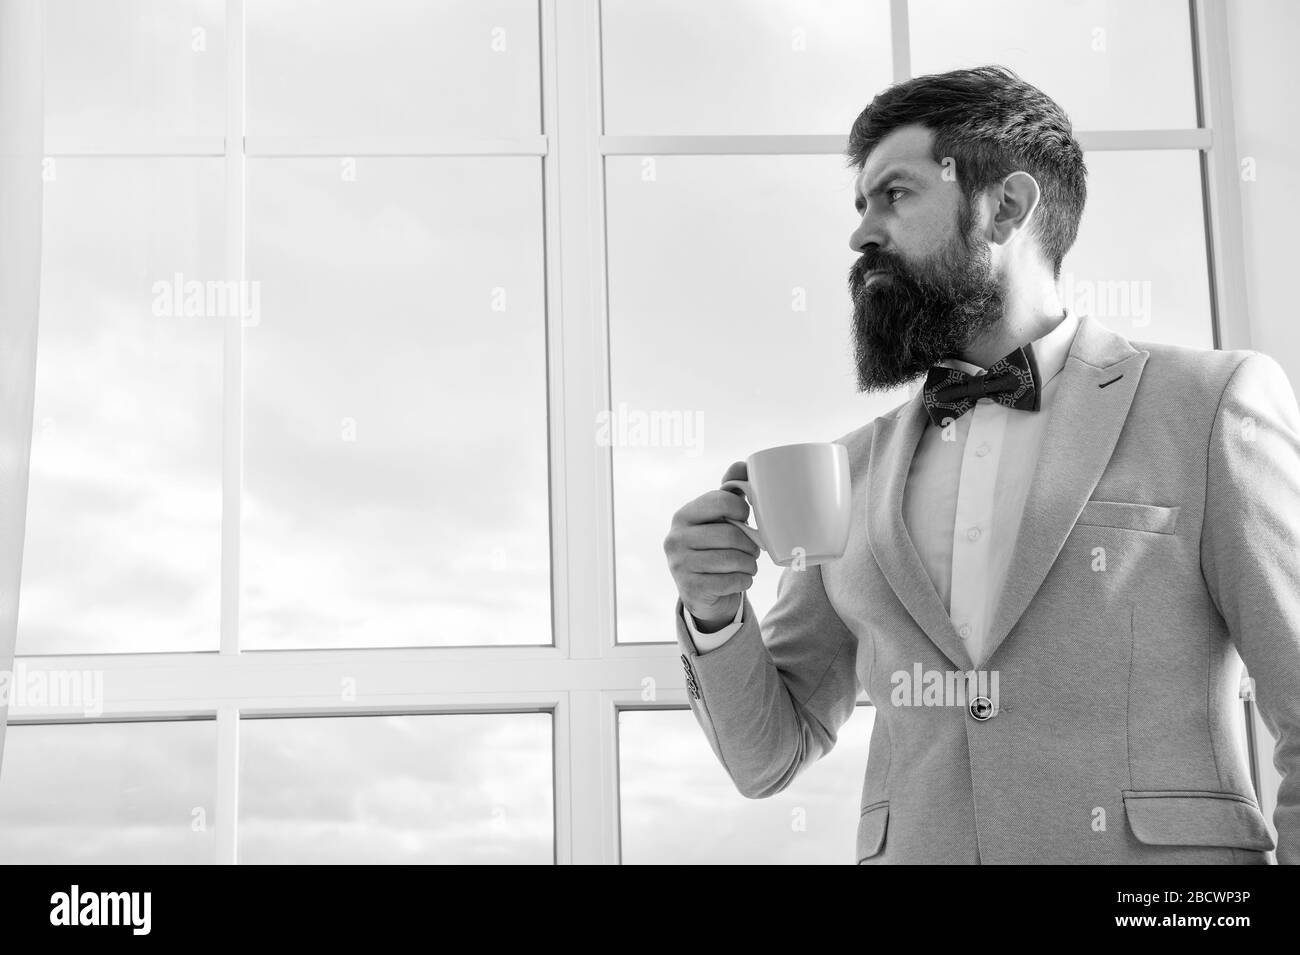 modern businessman. thoughtful bearded man drink coffee. businessman in modern formal outfit. modern life. business man at window. future success. morning inspiration. copy space. modern office. Stock Photo